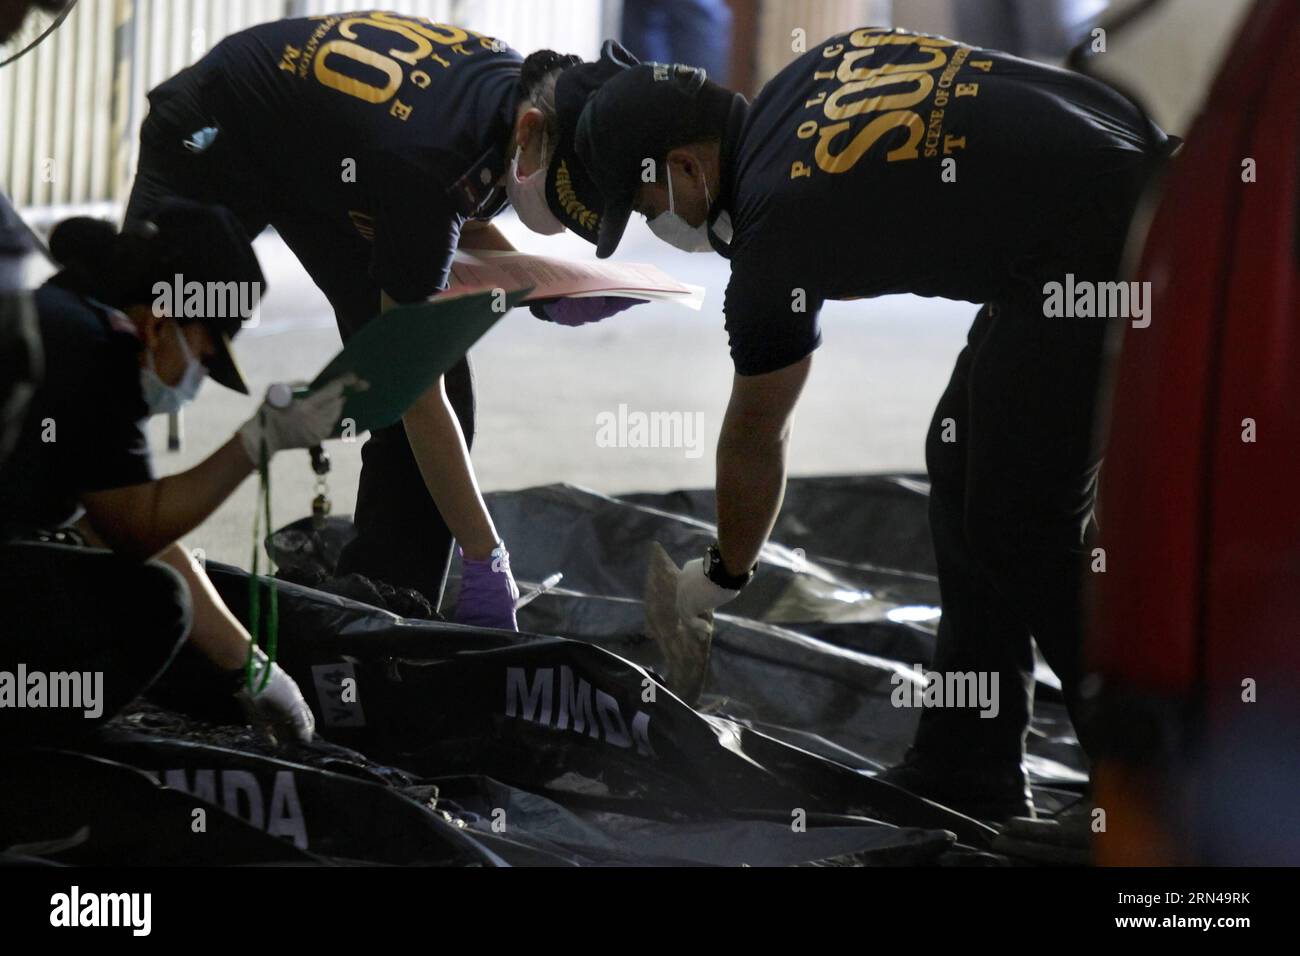 AKTUELLES ZEITGESCHEHEN Brand in Schuhfabrik nahe Manila, Philippinen (150514) -- VALENZUELA CITY, May 14, 2015 -- Members of the Philippine National Police s Scene-of the-Crime Operatives (PNP-SOCO) inspect one of the bodies of the employees who were killed in a warehouse fire in Valenzuela City, the Philippines, May 14, 2015. Death toll has risen to 72 in a fire that occurred Wednesday noon at a sandals factory in Valenzuela city of Metro Manila, the Philippines, said a senior government official Thursday. ) (zjy) PHILIPPINES-VALENZUELA CITY-FIRE RouellexUmali PUBLICATIONxNOTxINxCHN   News C Stock Photo